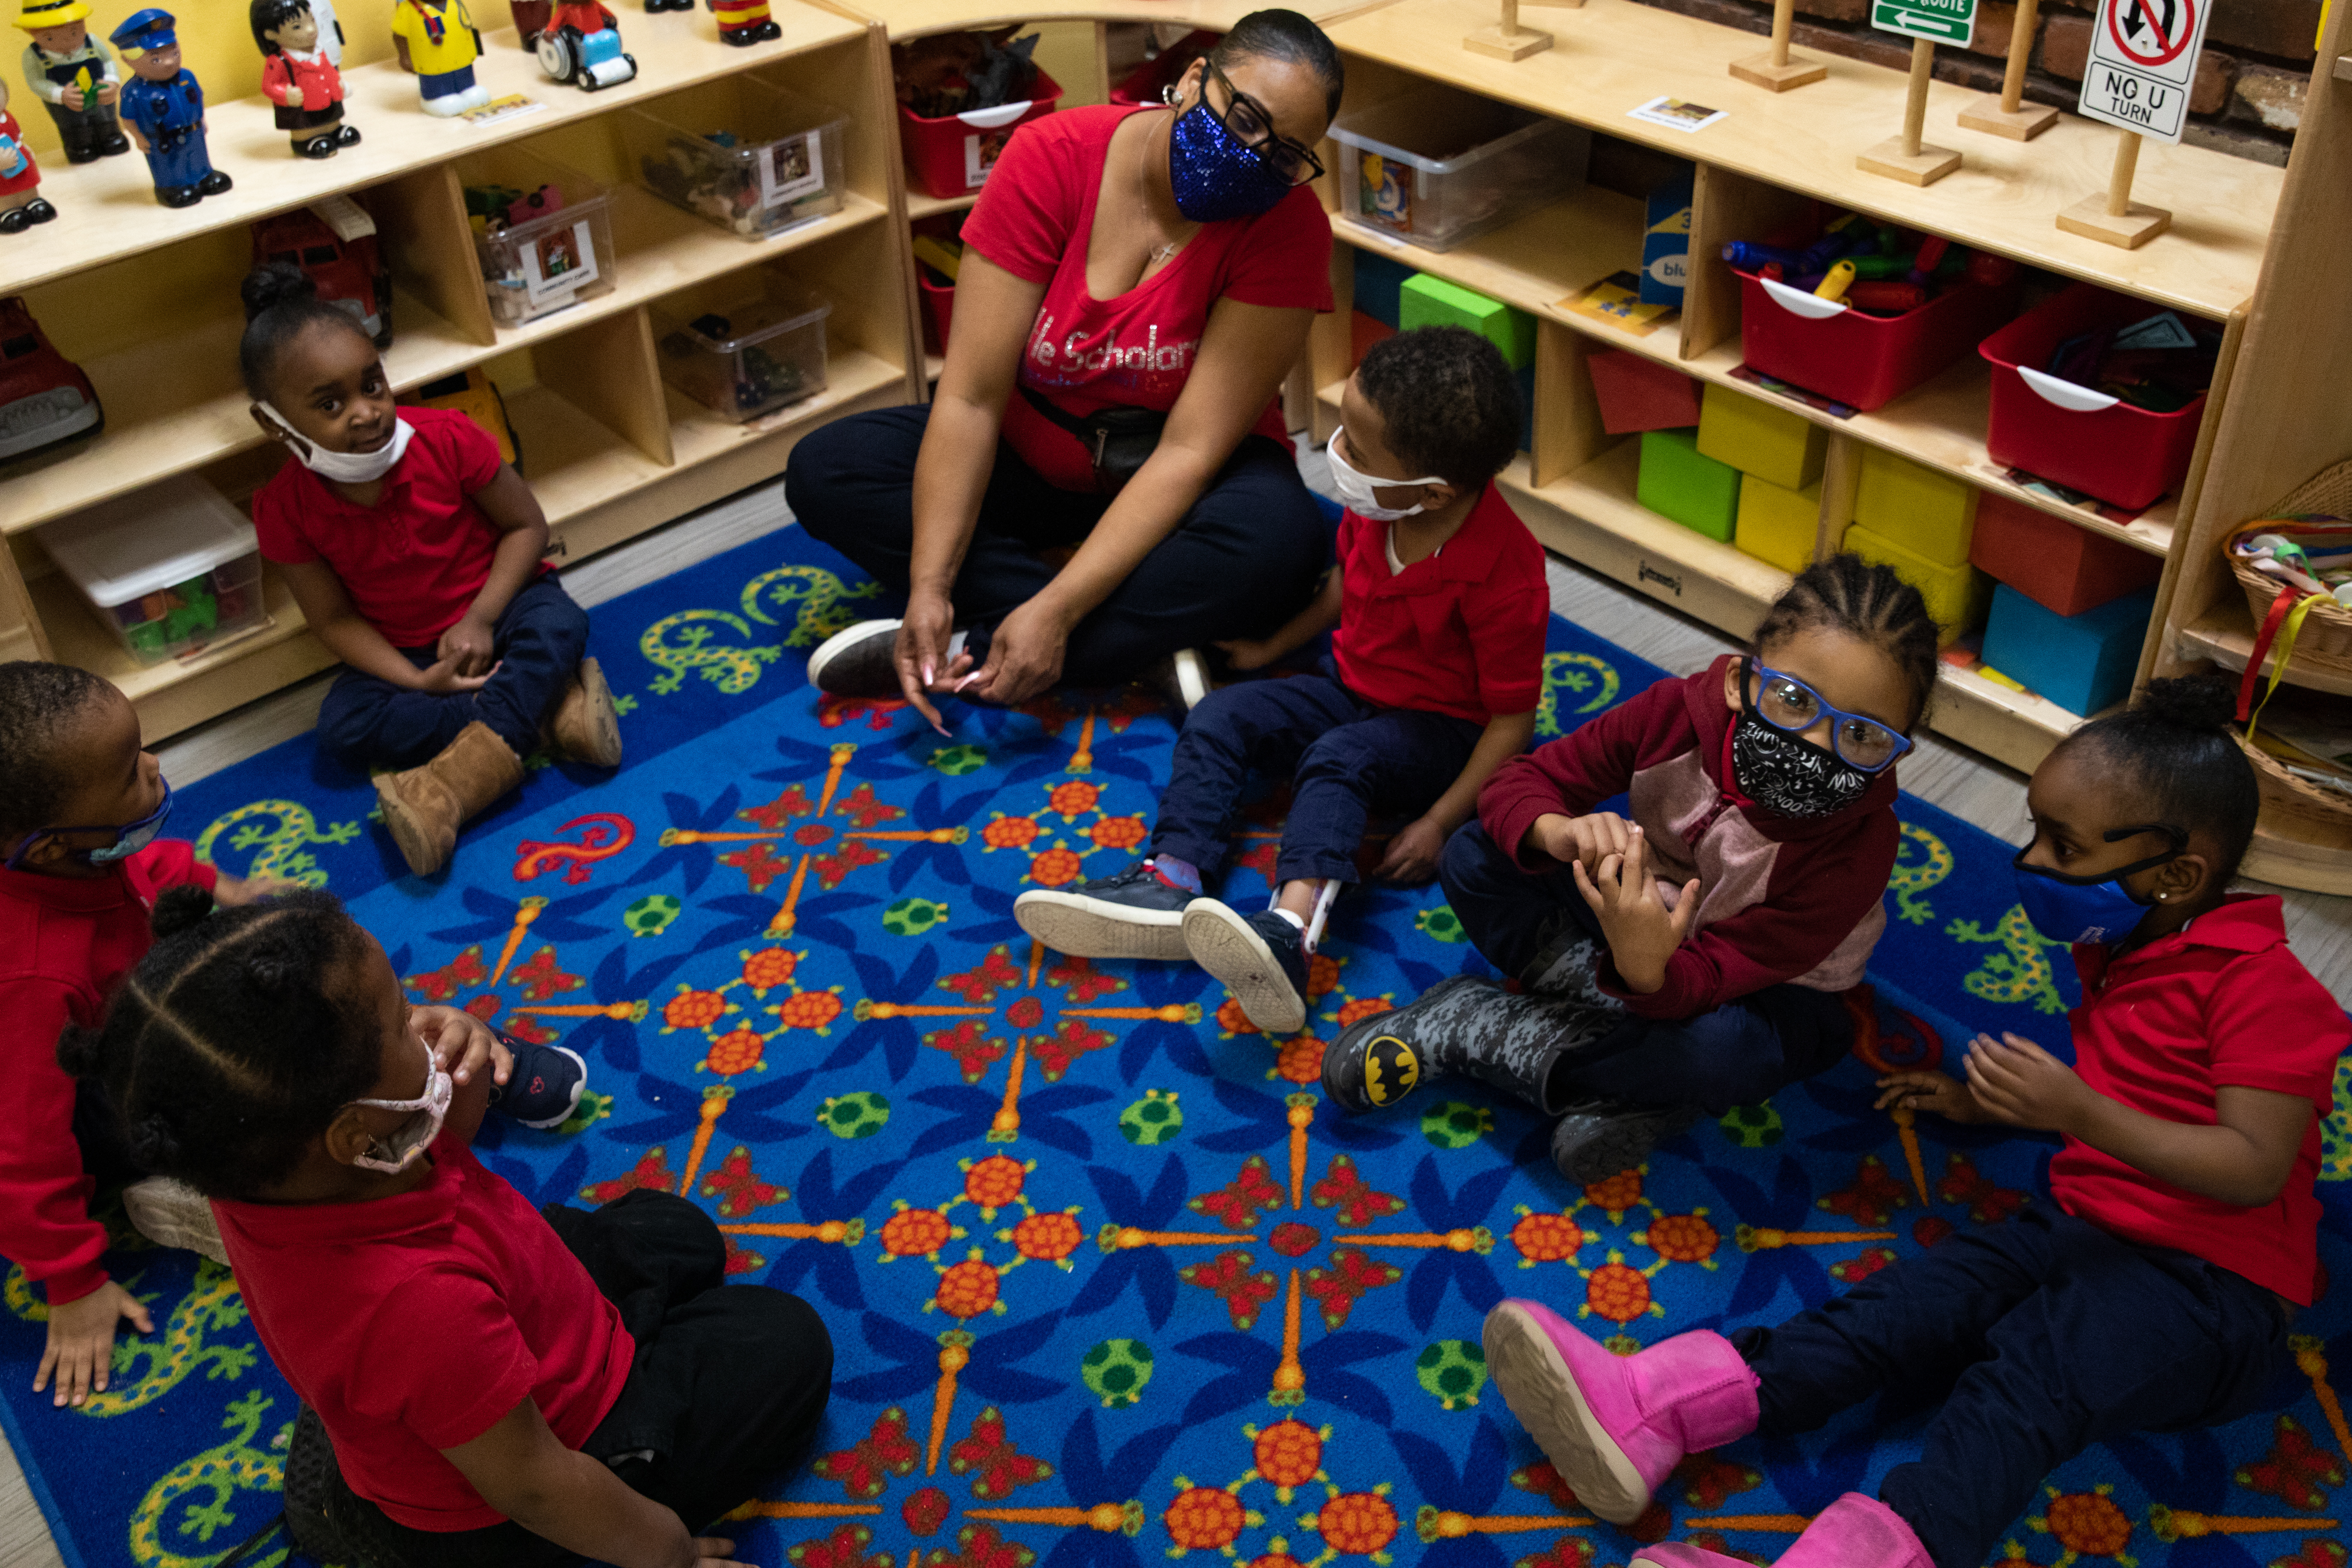 Preschoolers sit in a circle as they participate in morning exercises at Little Scholars child care center in Detroit, Michigan, U.S., on Thursday April 1, 2021.